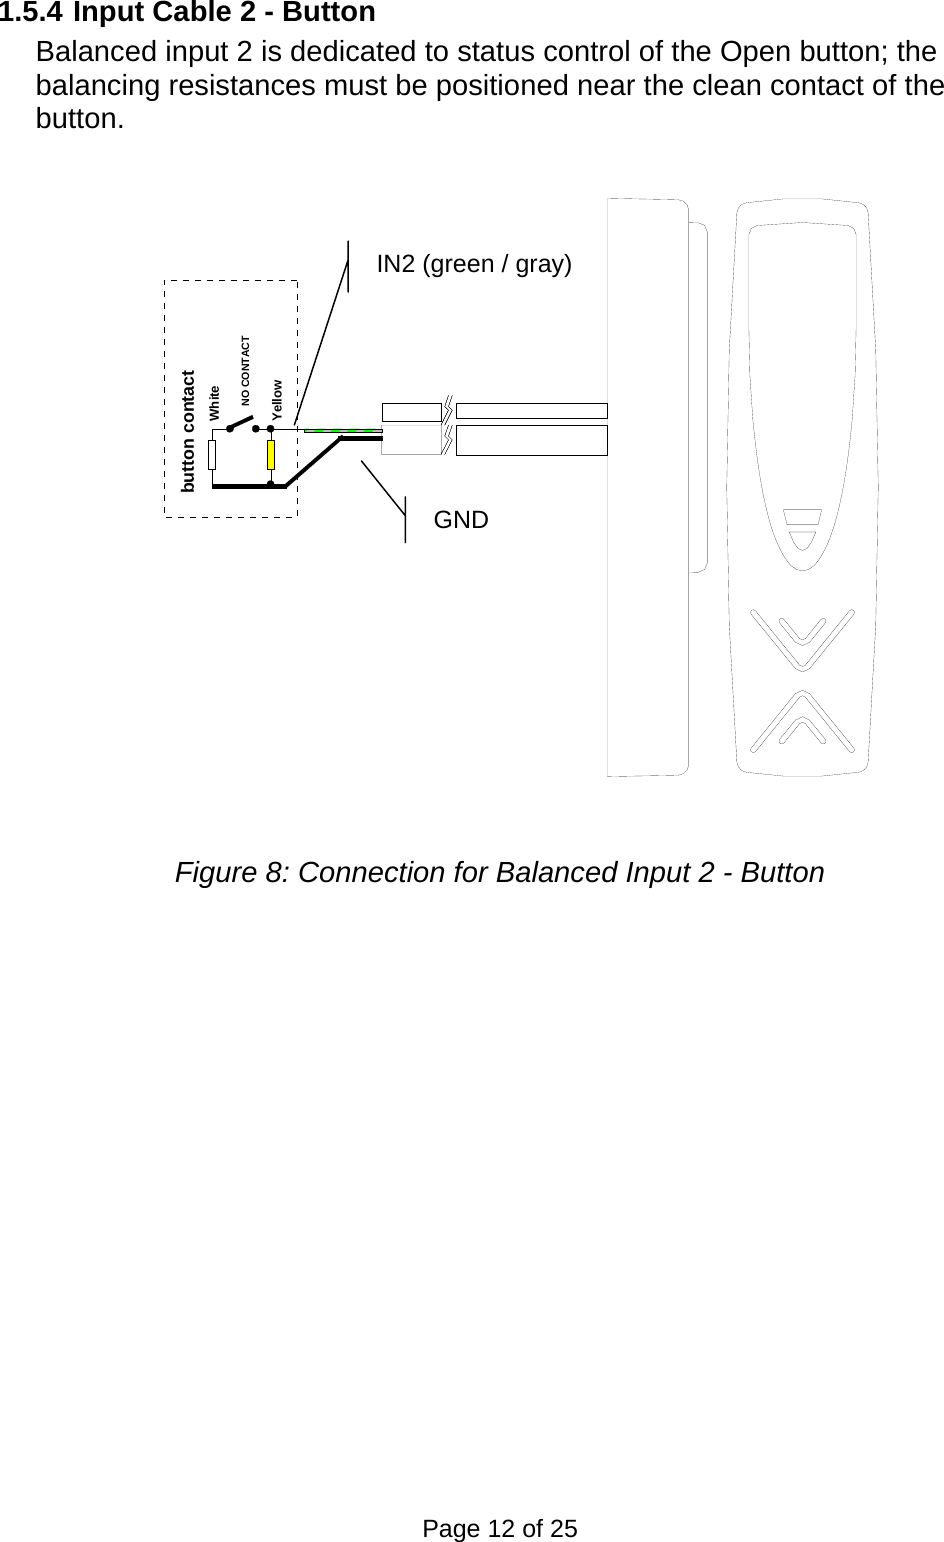 1.5.4 Input Cable 2 - Button Balanced input 2 is dedicated to status control of the Open button; the balancing resistances must be positioned near the clean contact of the button. WhiteYellowbutton contactNO CONTACT  GND IN2 (green / gray) Figure 8: Connection for Balanced Input 2 - Button Page 12 of 25 